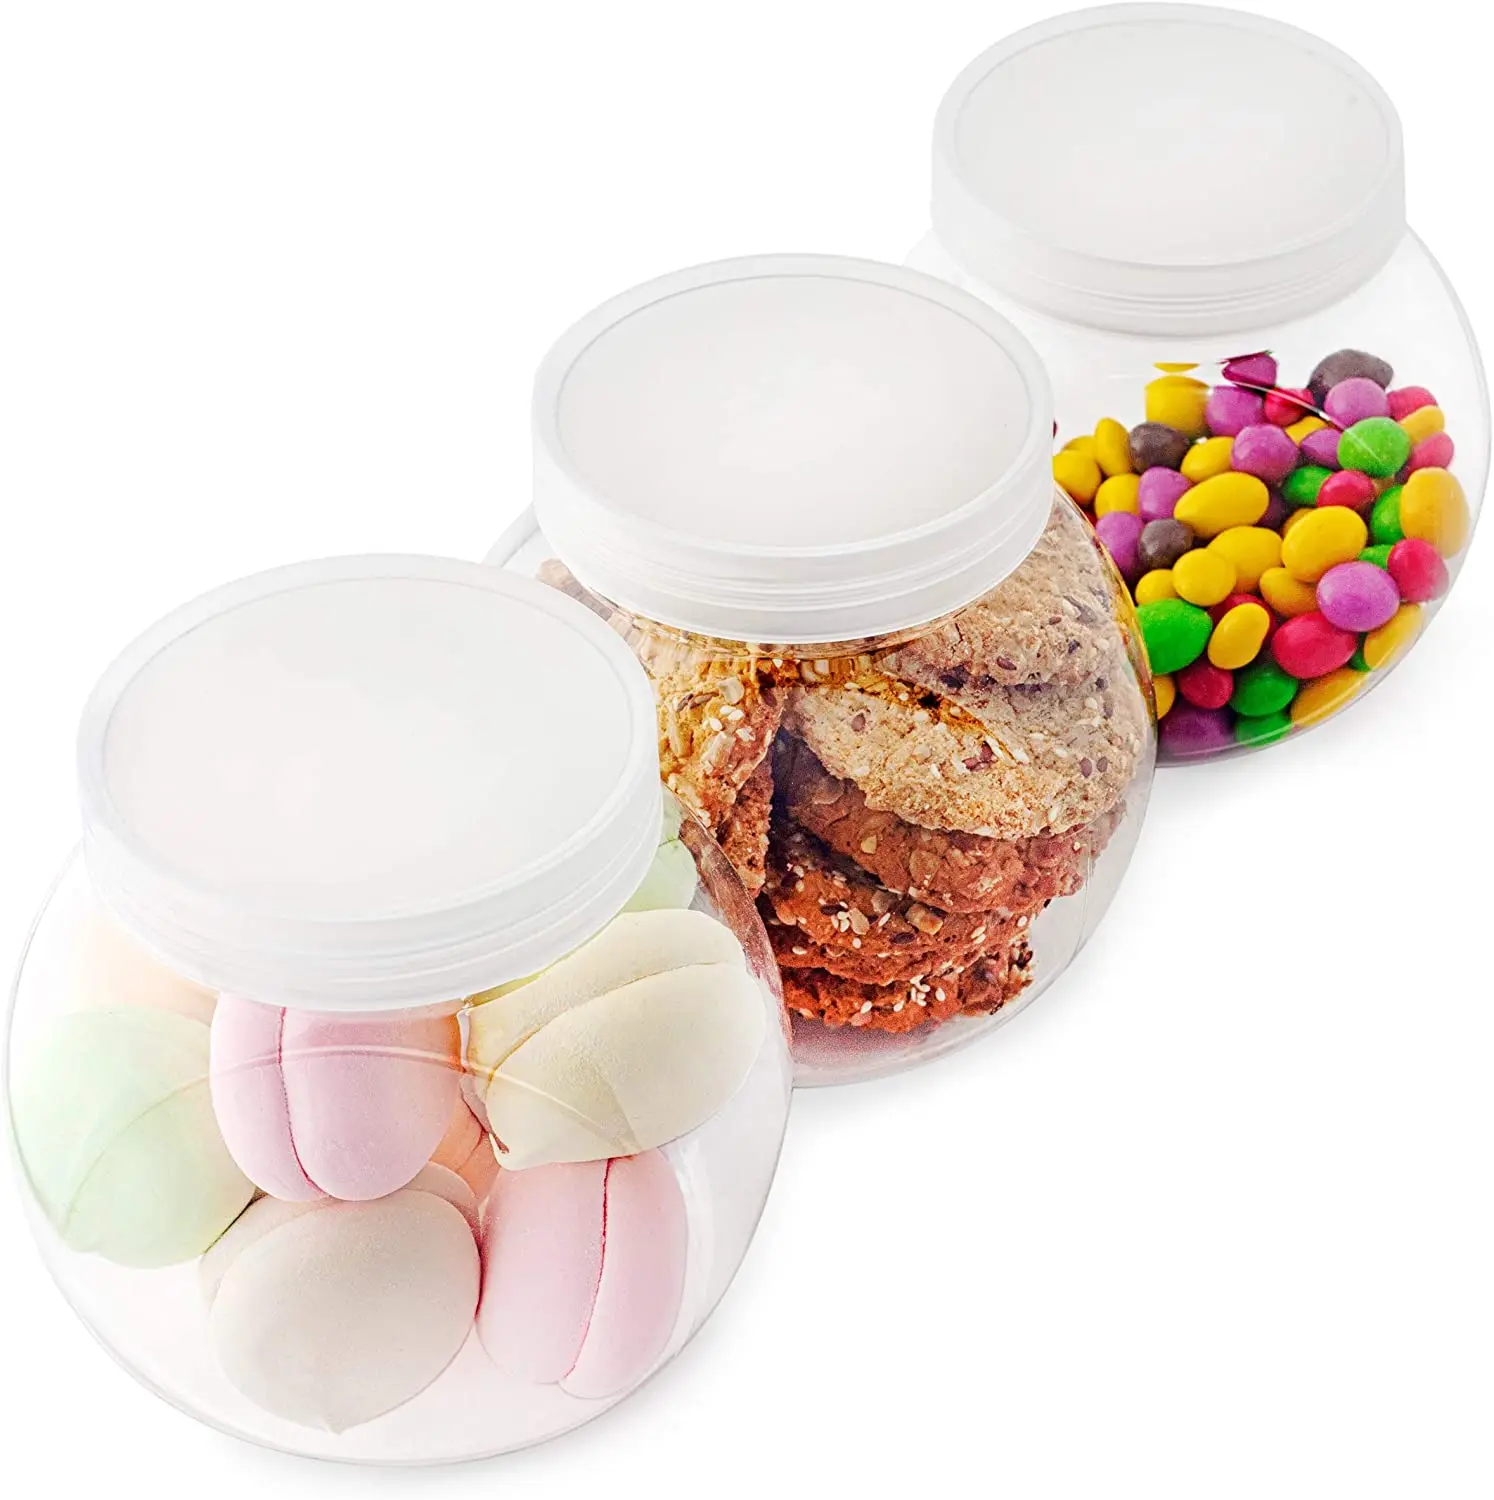 clear plastic candy jars and cookie